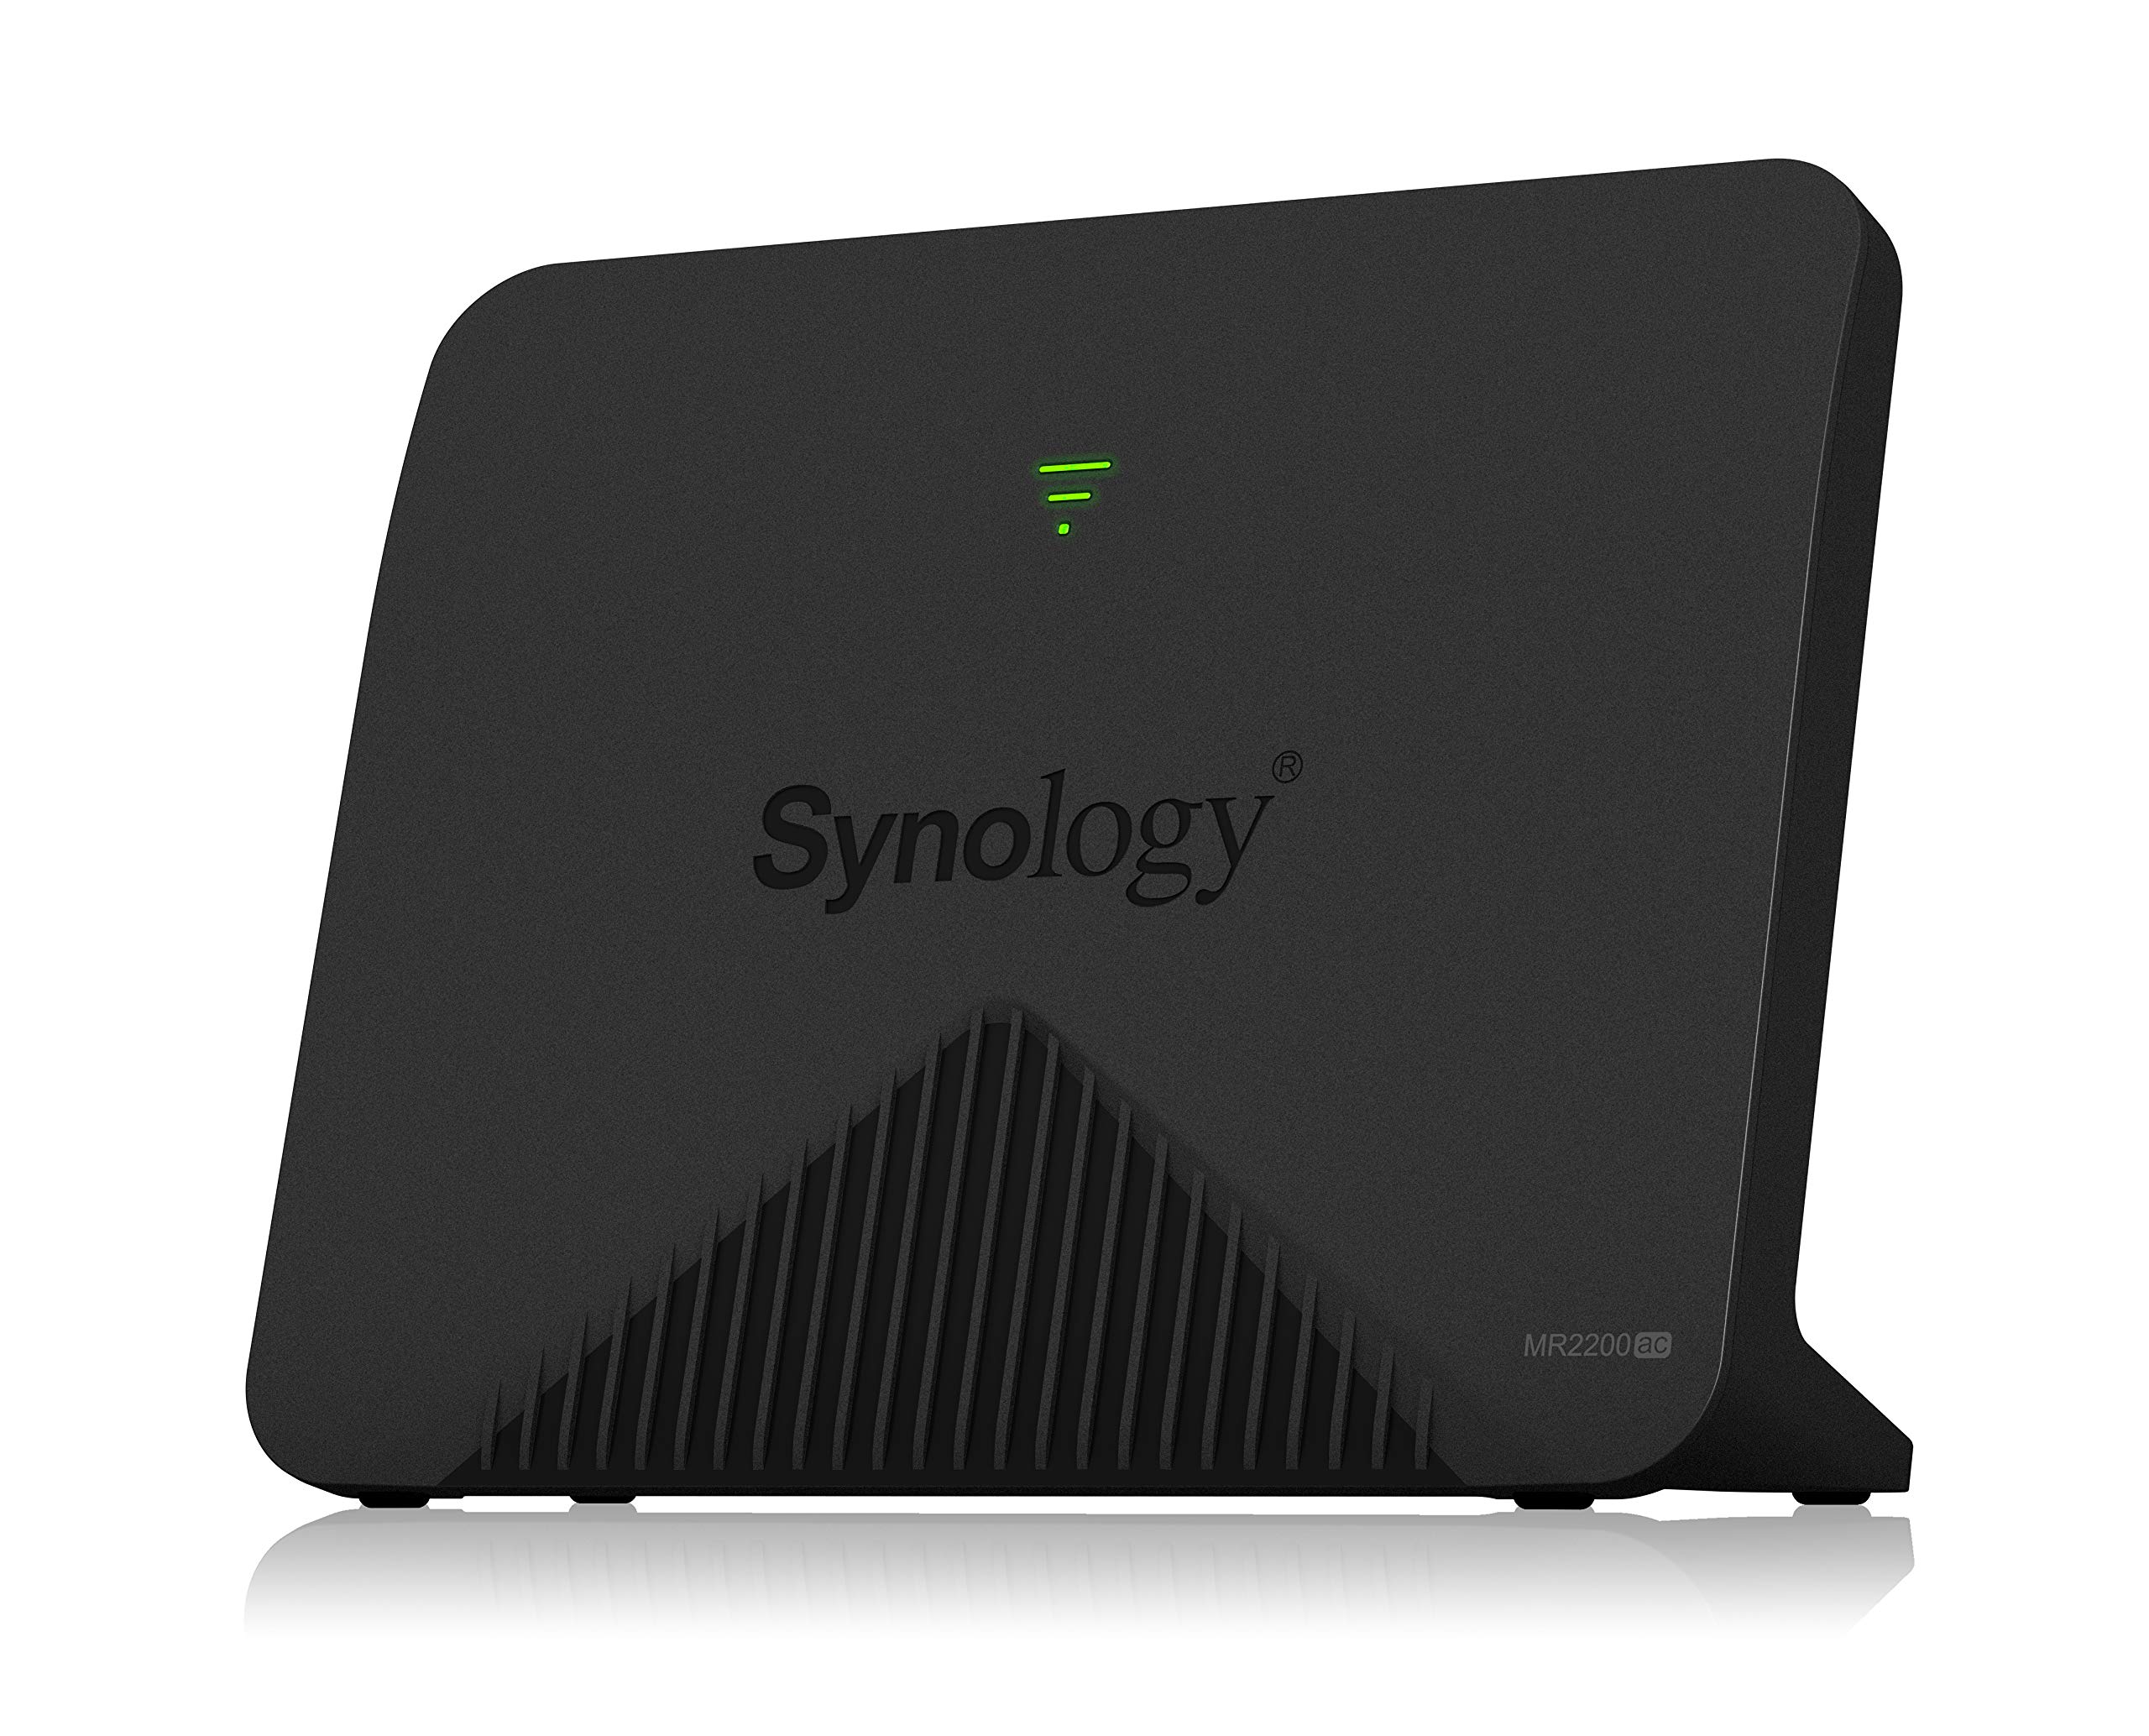 Synology MR2200ac Mesh Wi-Fi Router & Arris Surfboard SB8200 DOCSIS 3.1 Gigabit Cable Modem, Approved for Cox, Xfinity, Spectrum & Others